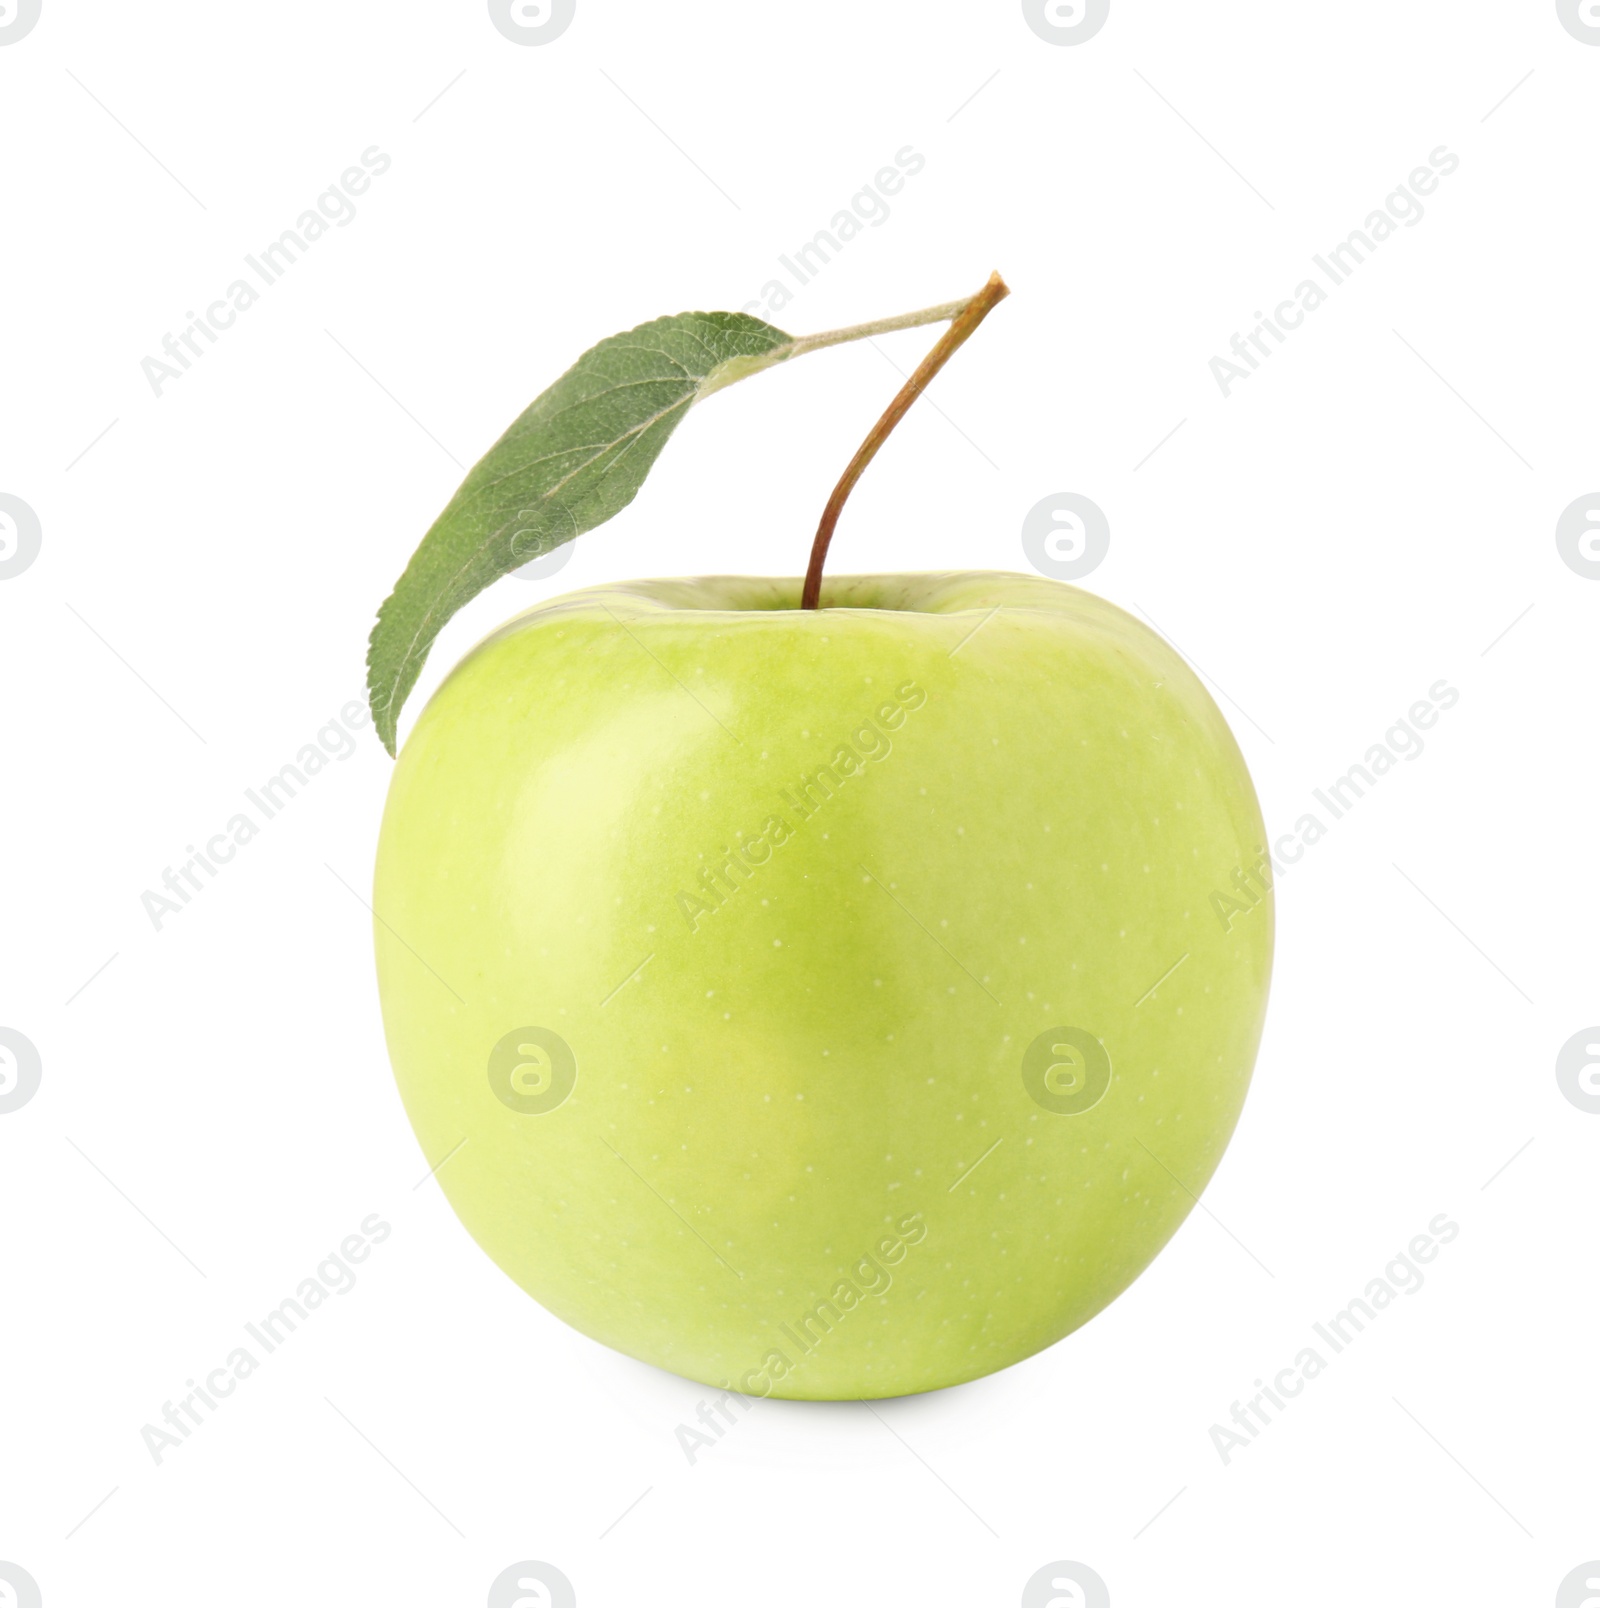 Photo of One ripe green apple with leaf isolated on white